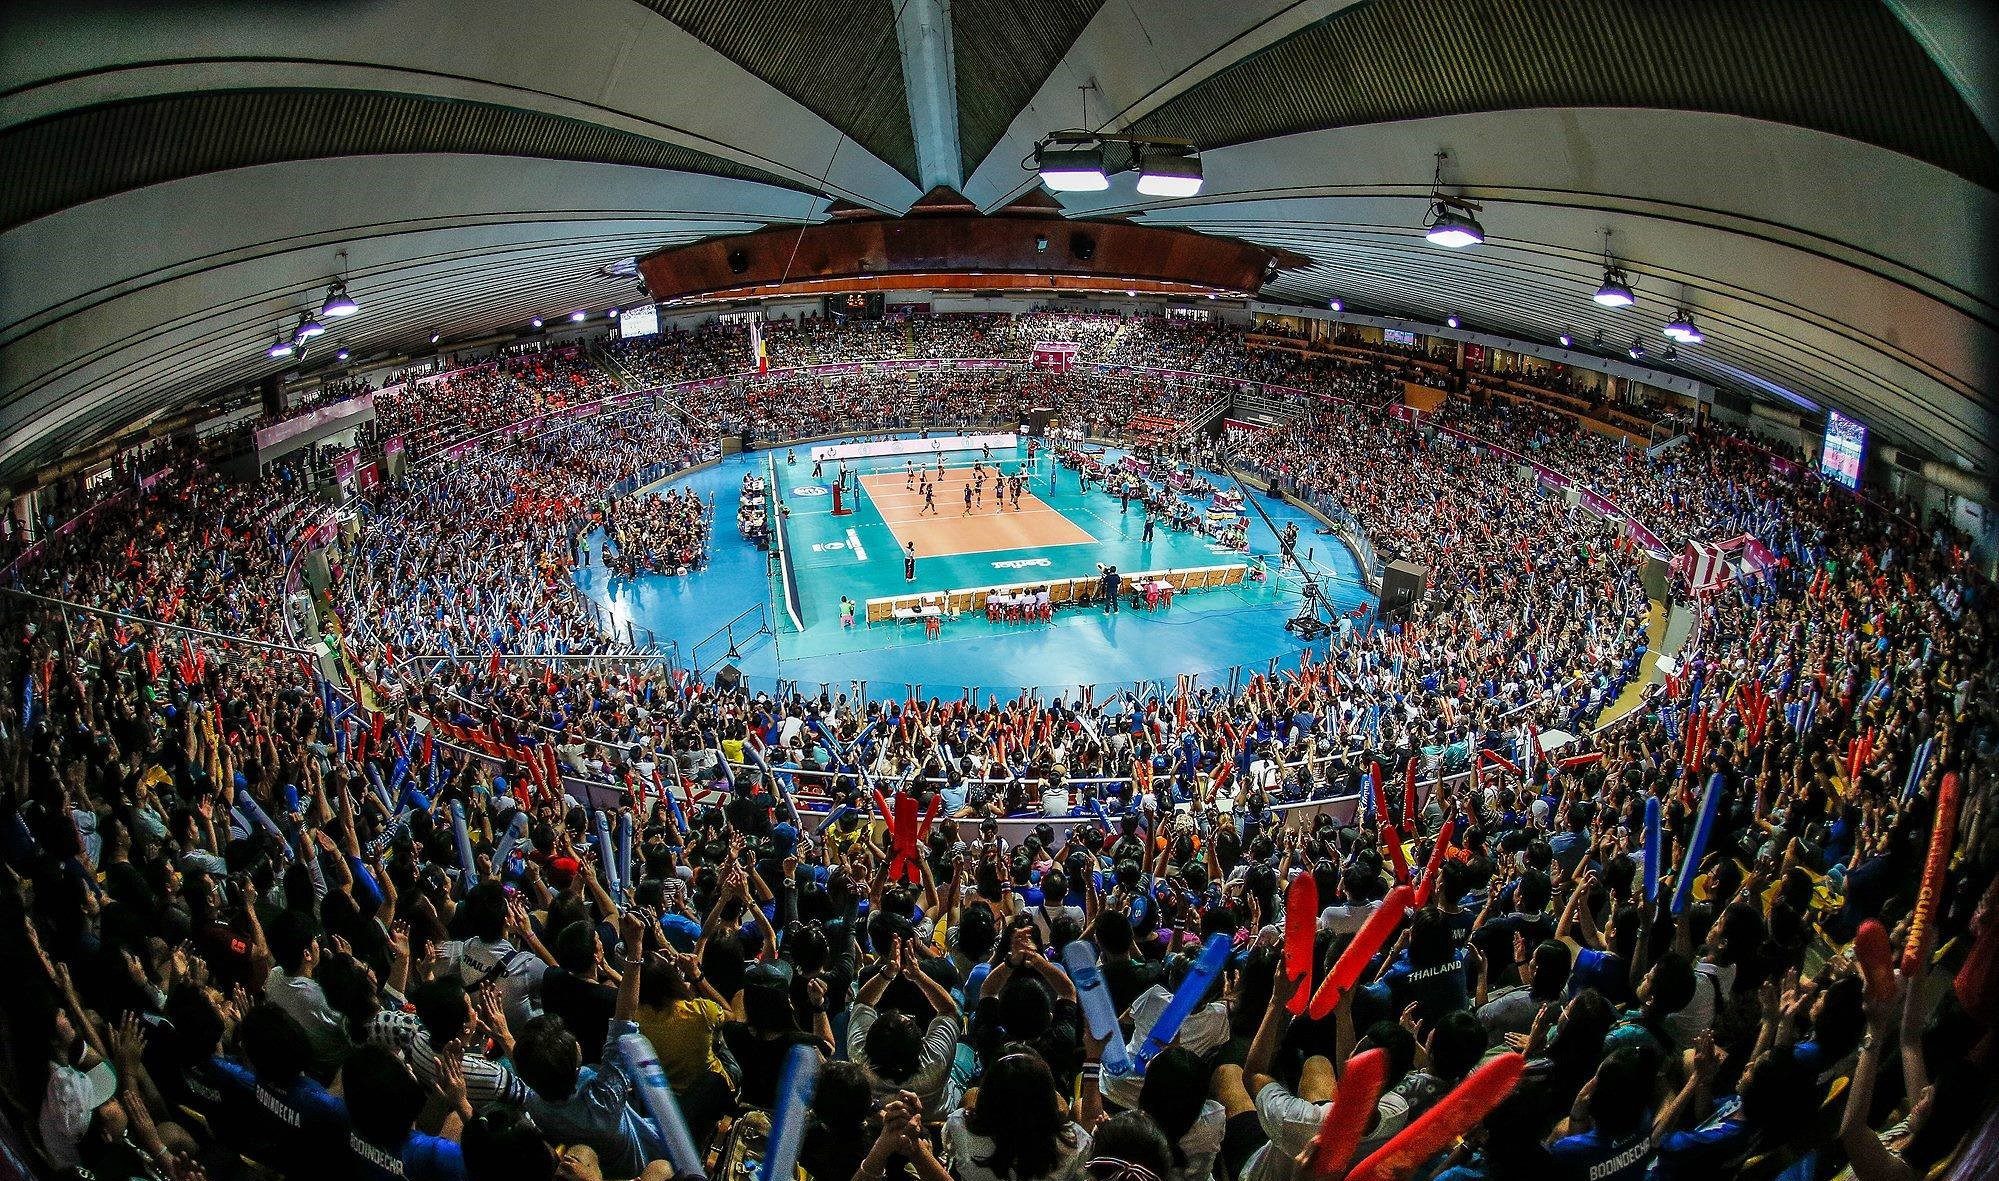 The Indoor Stadium Hua Mark is set to stage this year's World Teqball Championships from November 29 to December 3 ©AVC